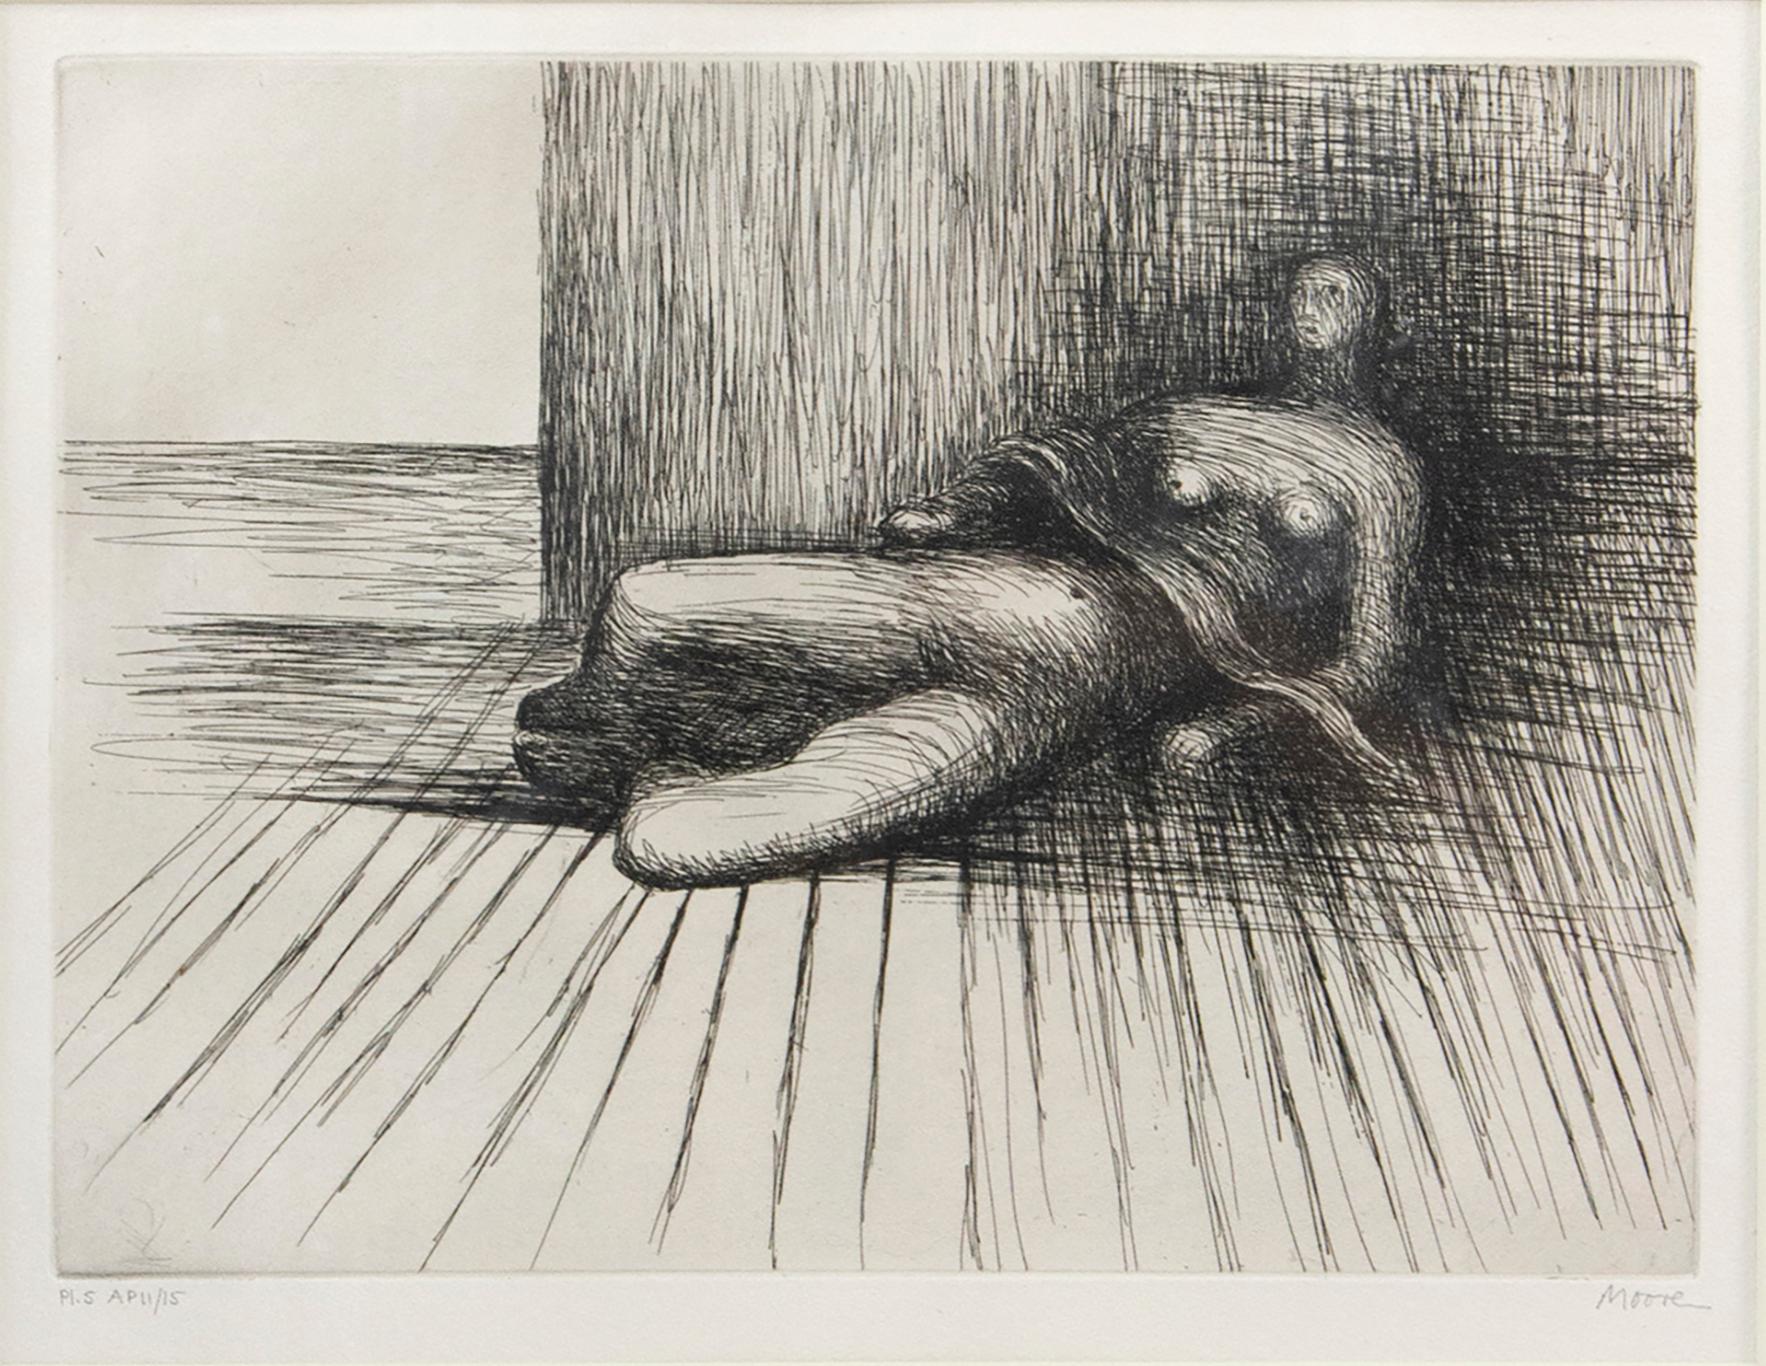 Etching, 1977, signed in pencil and numbered AP aside from the edition of 25, published by Henry Moore, Much Hadham, 57.5 x 48.5 cm. (22.6 x 19 in.)
